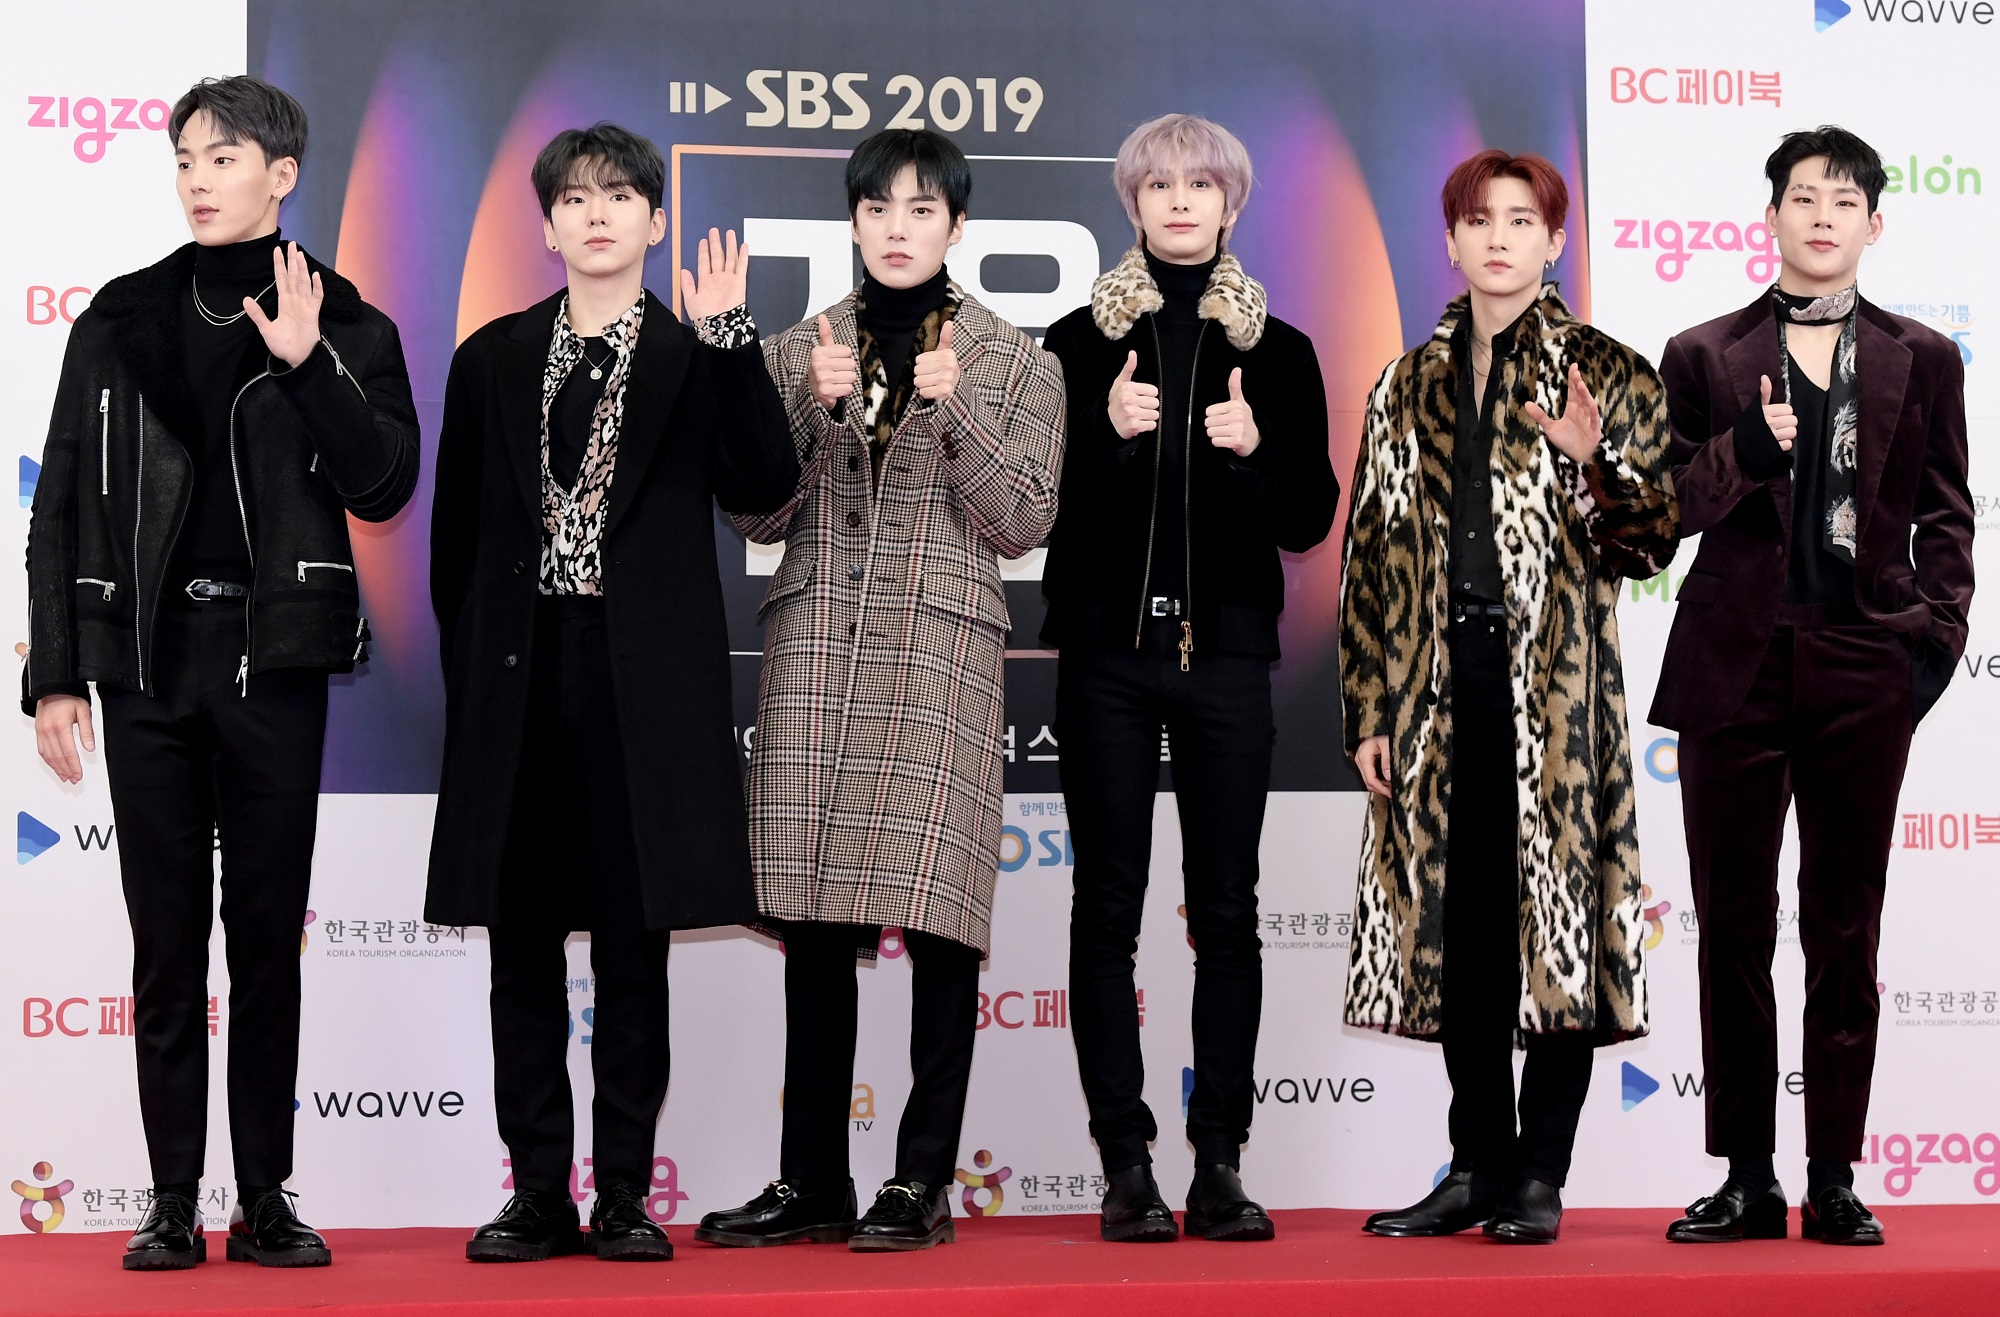 The members of Monsta X pose on the red carpet during a photocall for 2019 SBS Gayo Daejeon